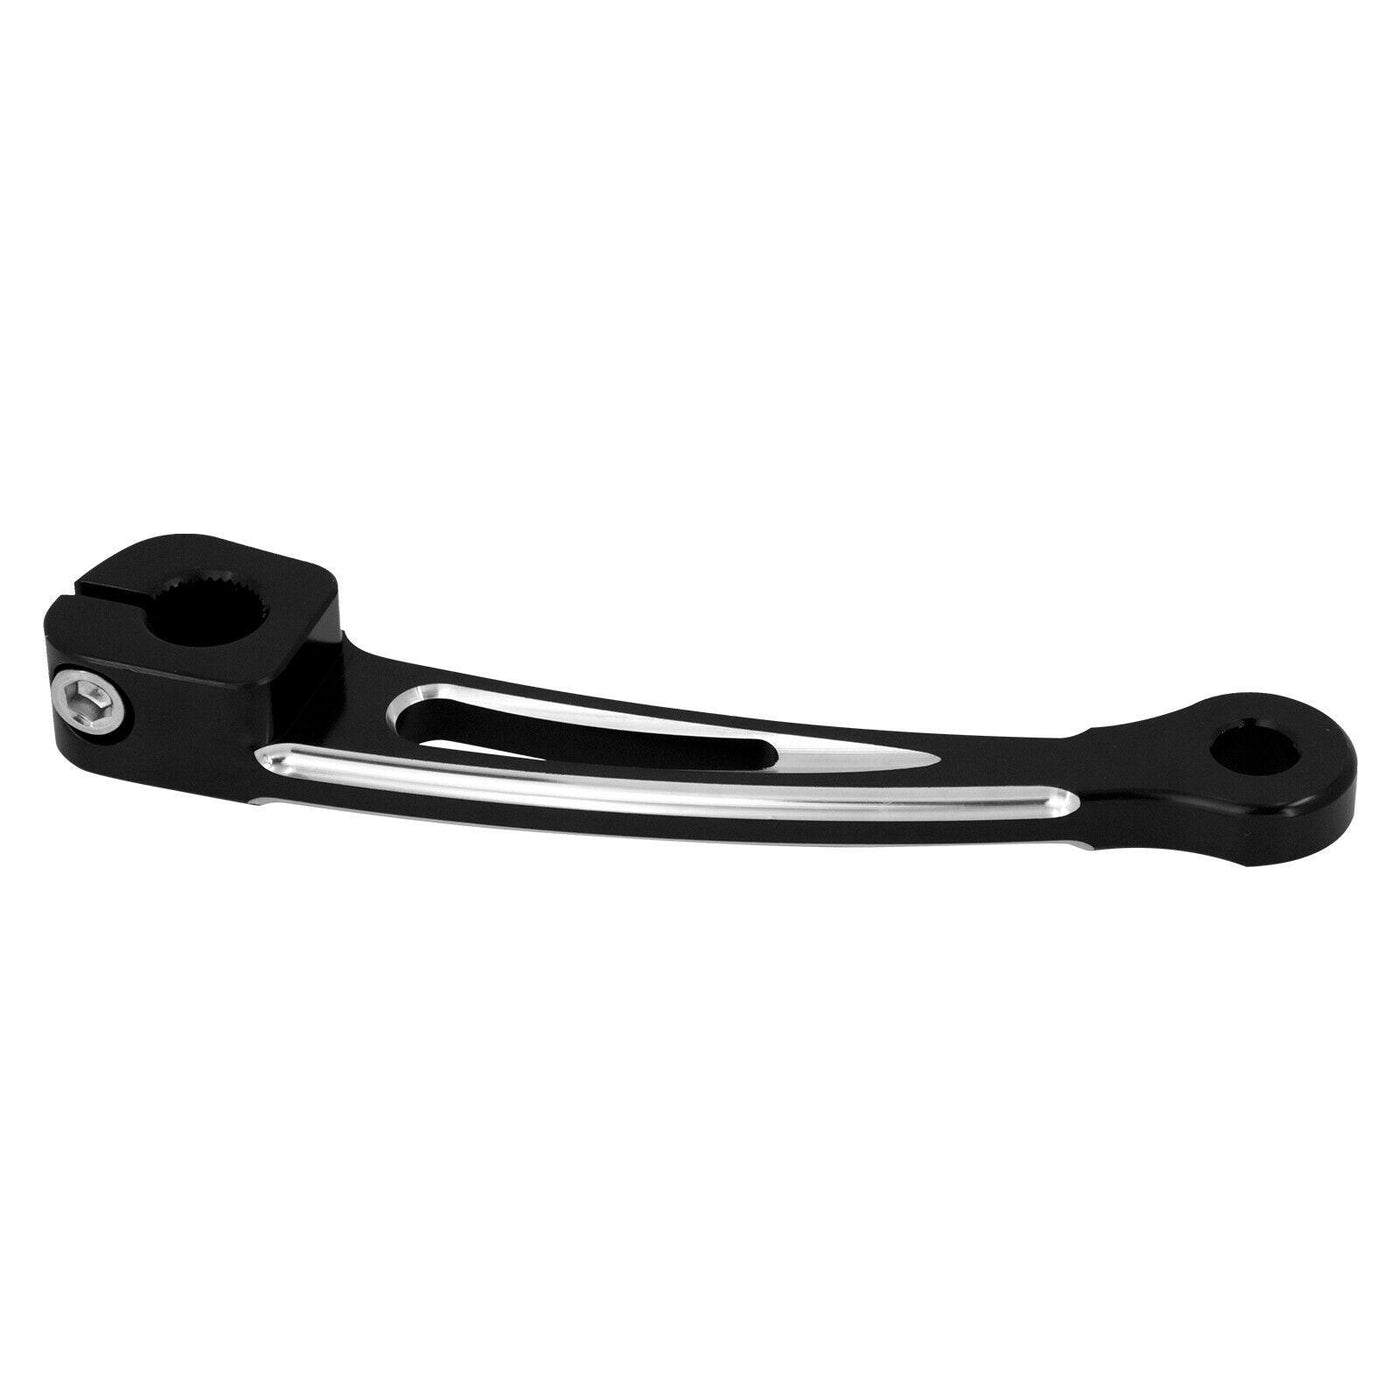 Inner Shift Shifter Arm Rod Lever Fit For Harley Touring Street Glide Road King - Moto Life Products